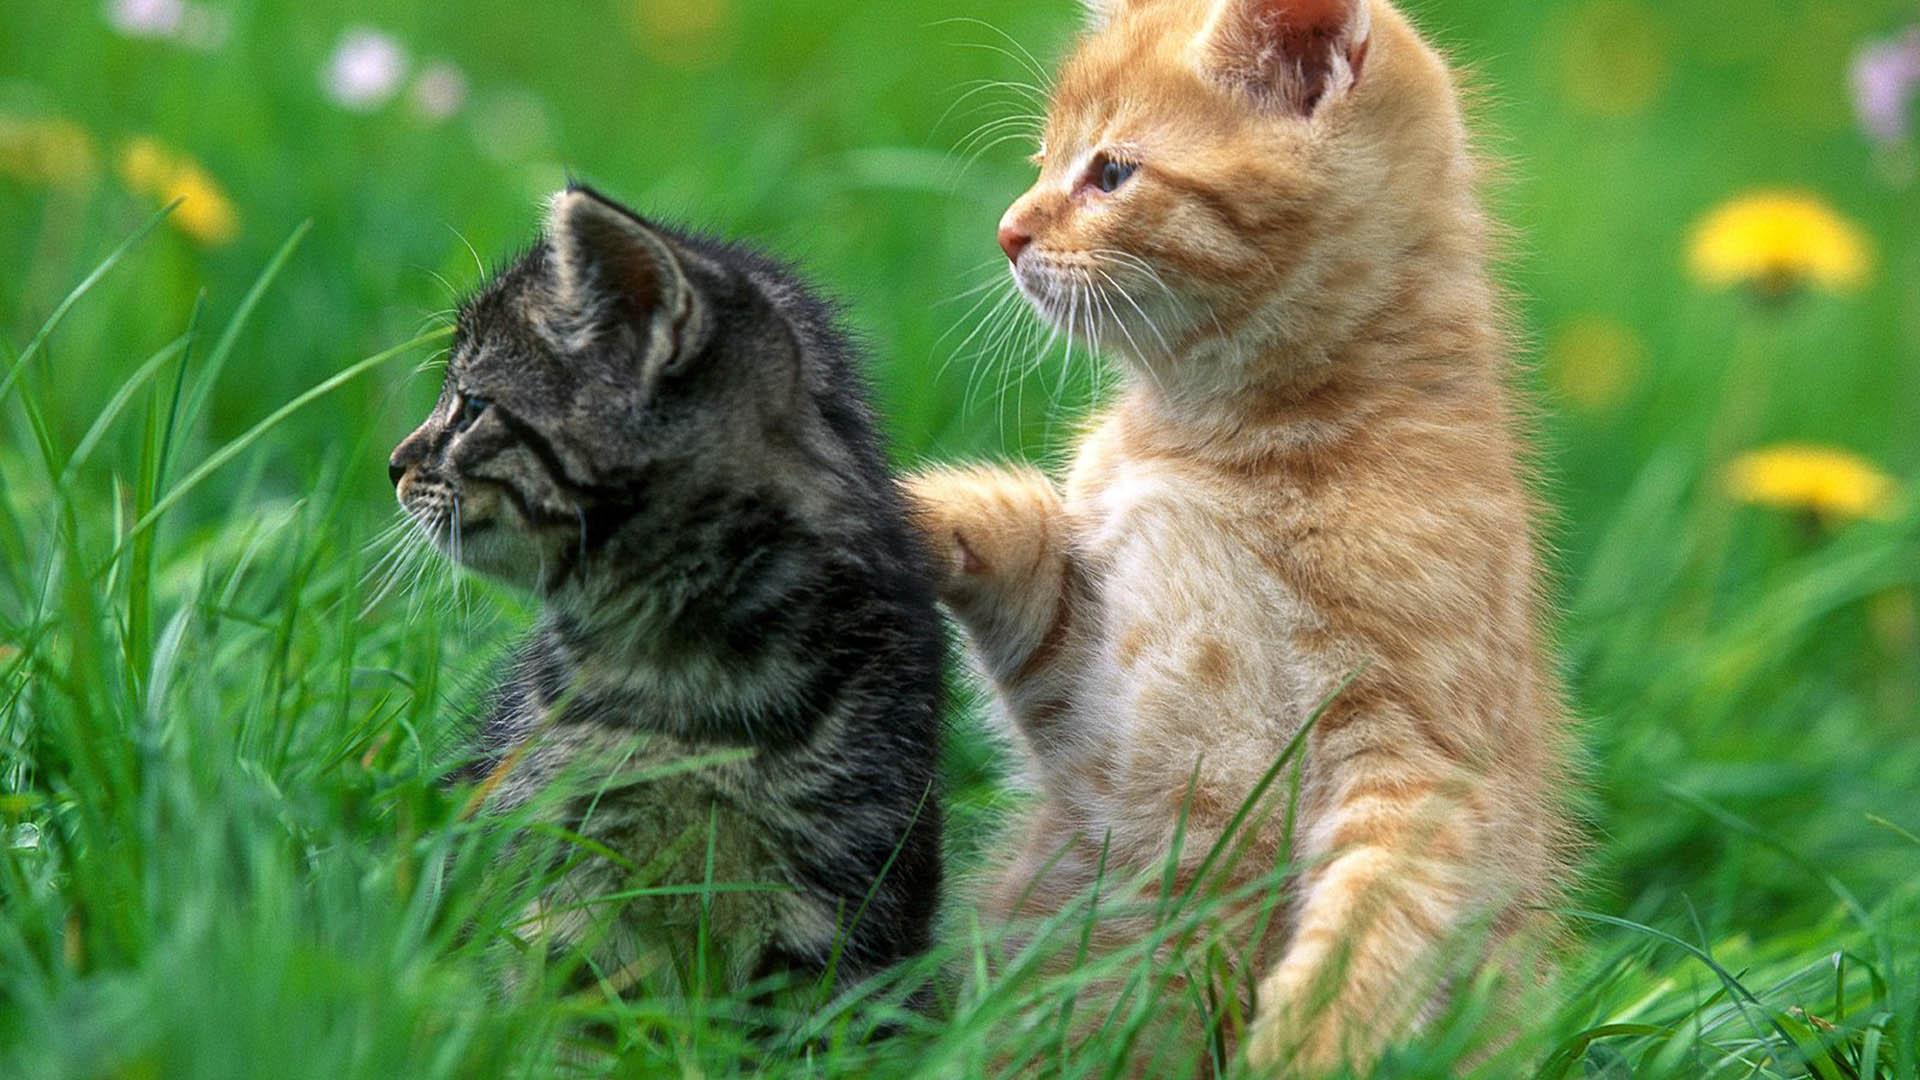 Kittens And Cats wallpaper